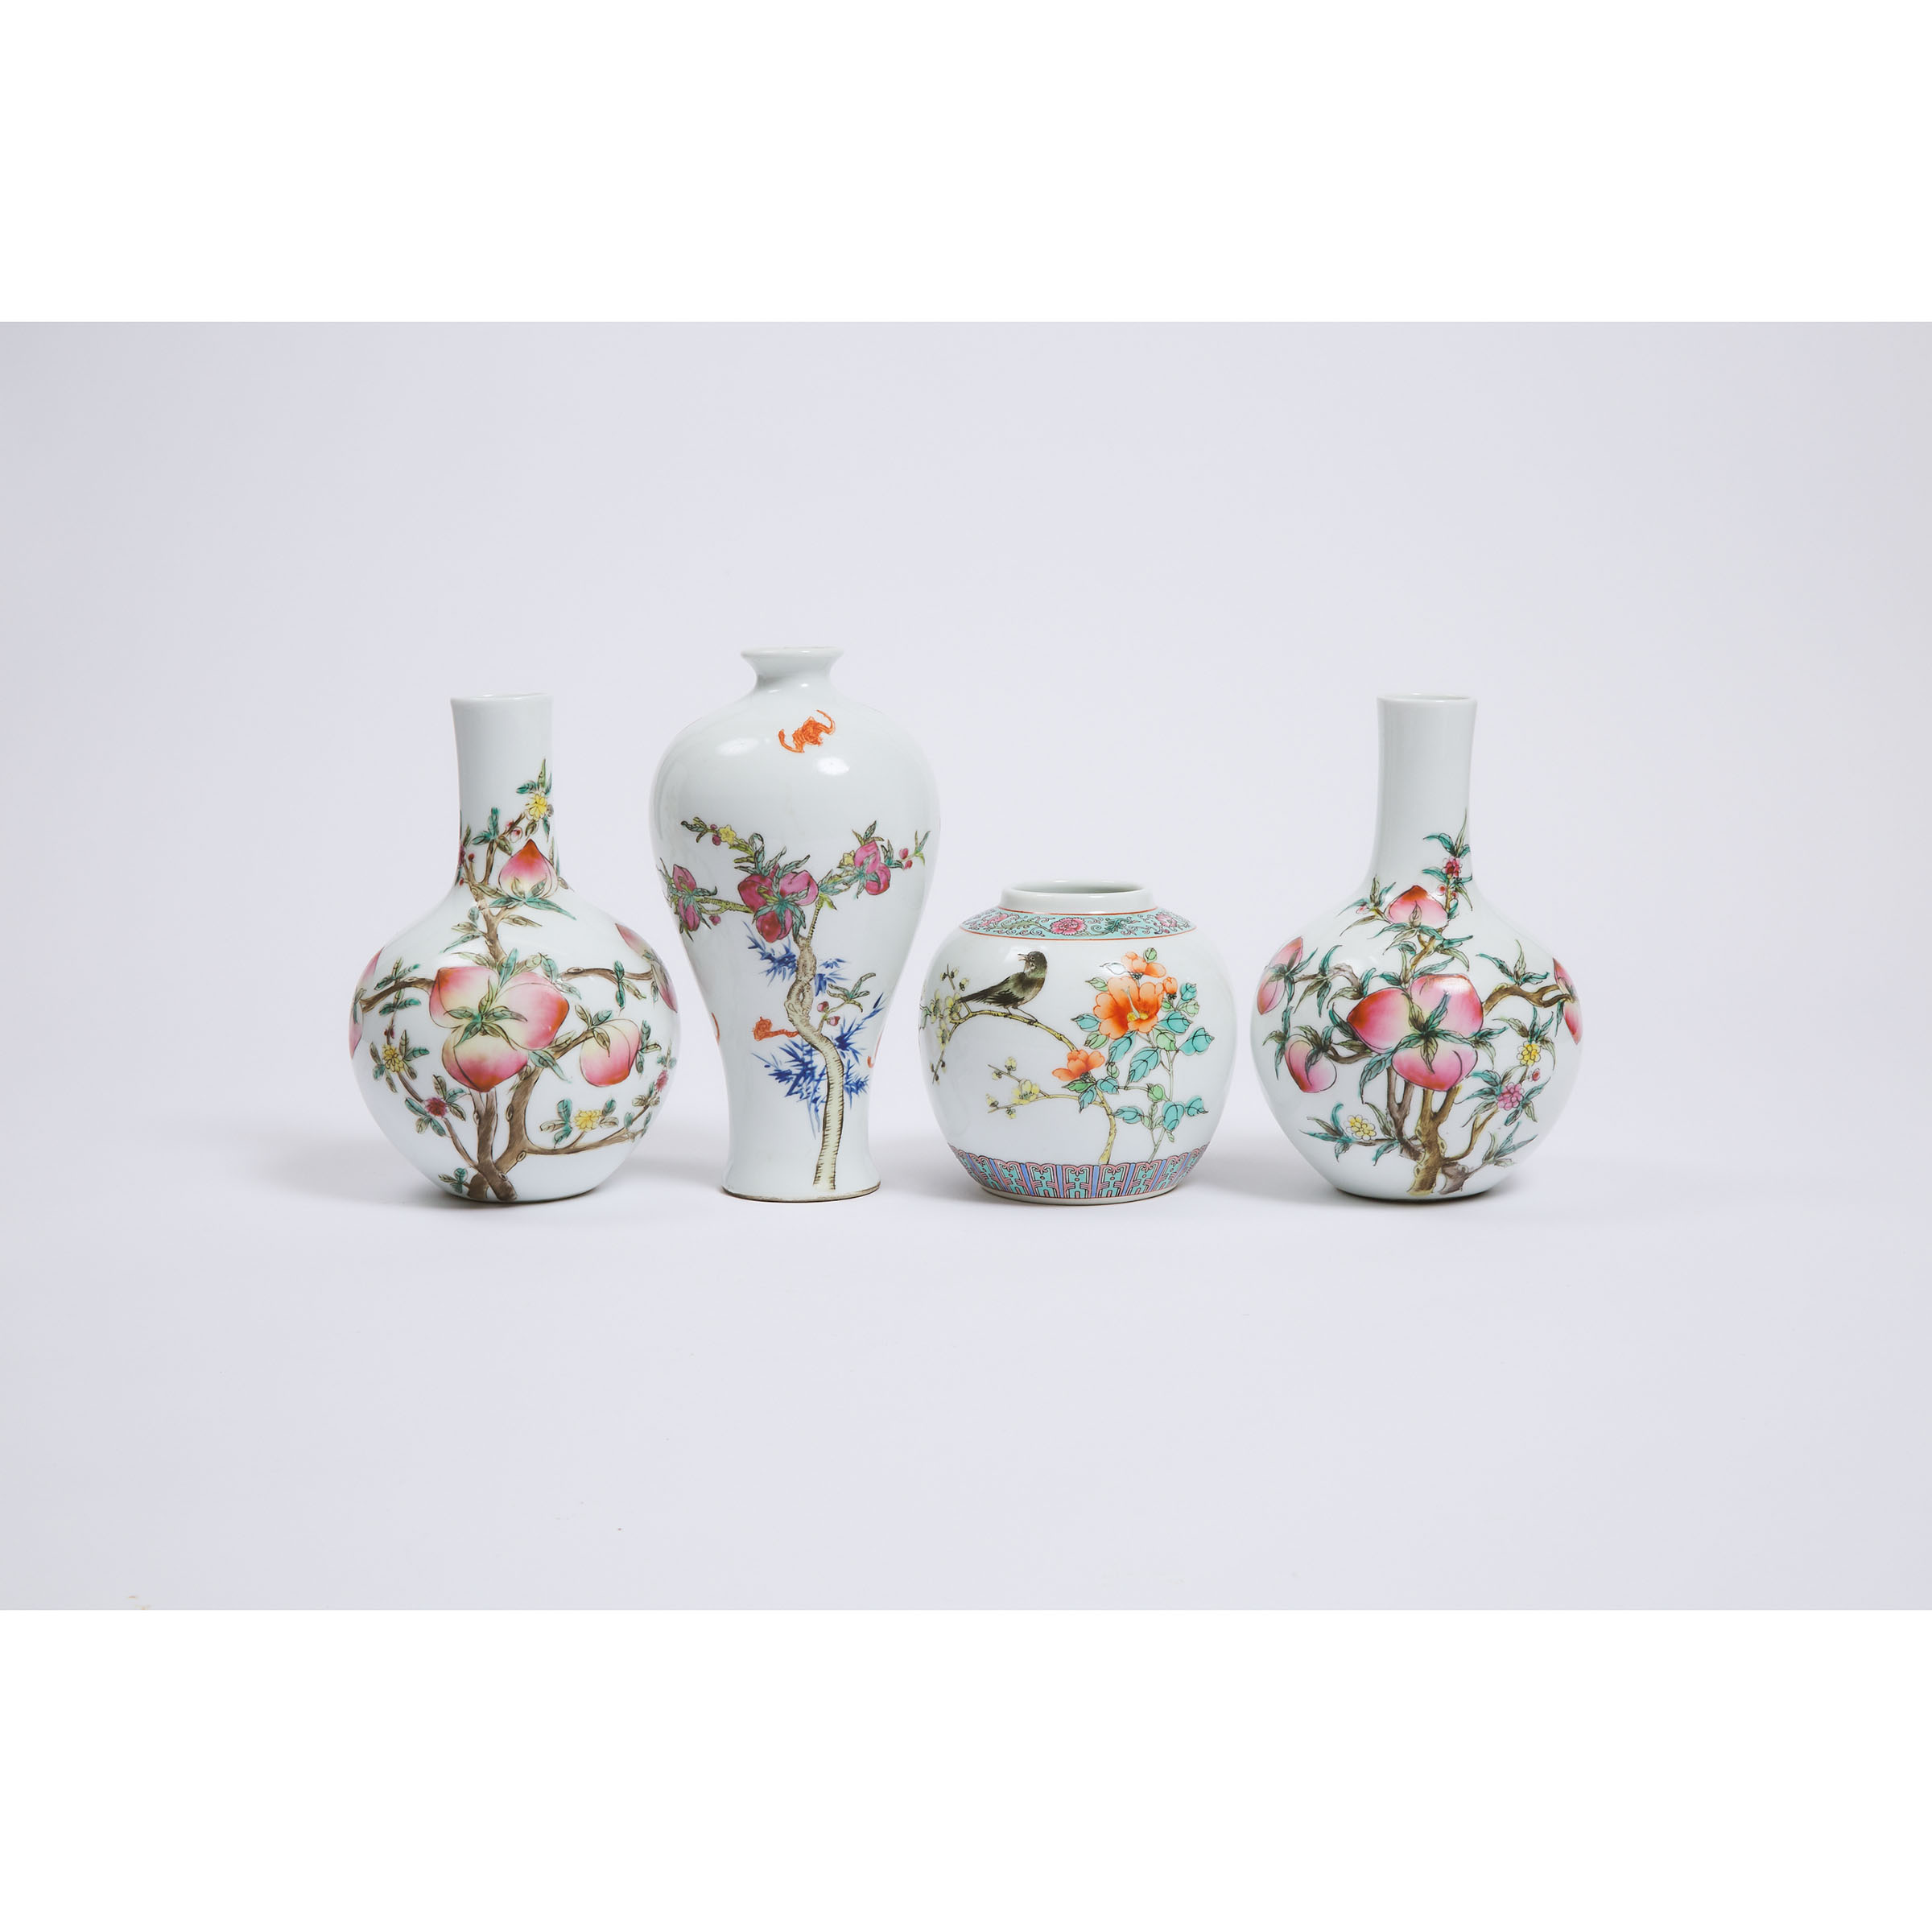 A Group of Four Miniature Famille Rose Porcelain Vases, 20th Century